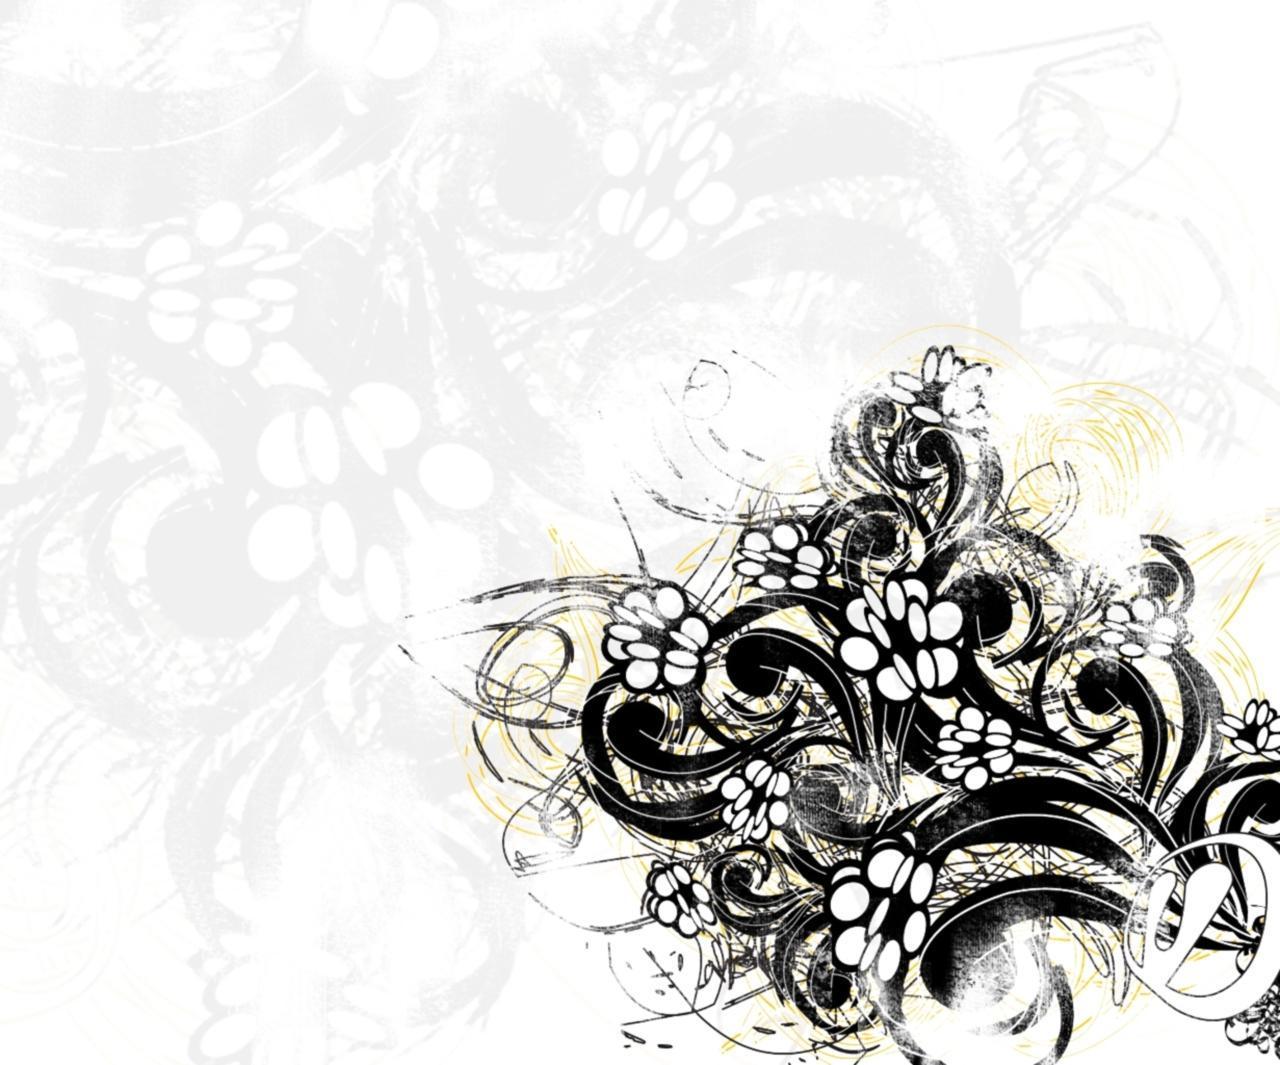 Awesome Craft Abstract Art Wallpaper Image taken from Abstract